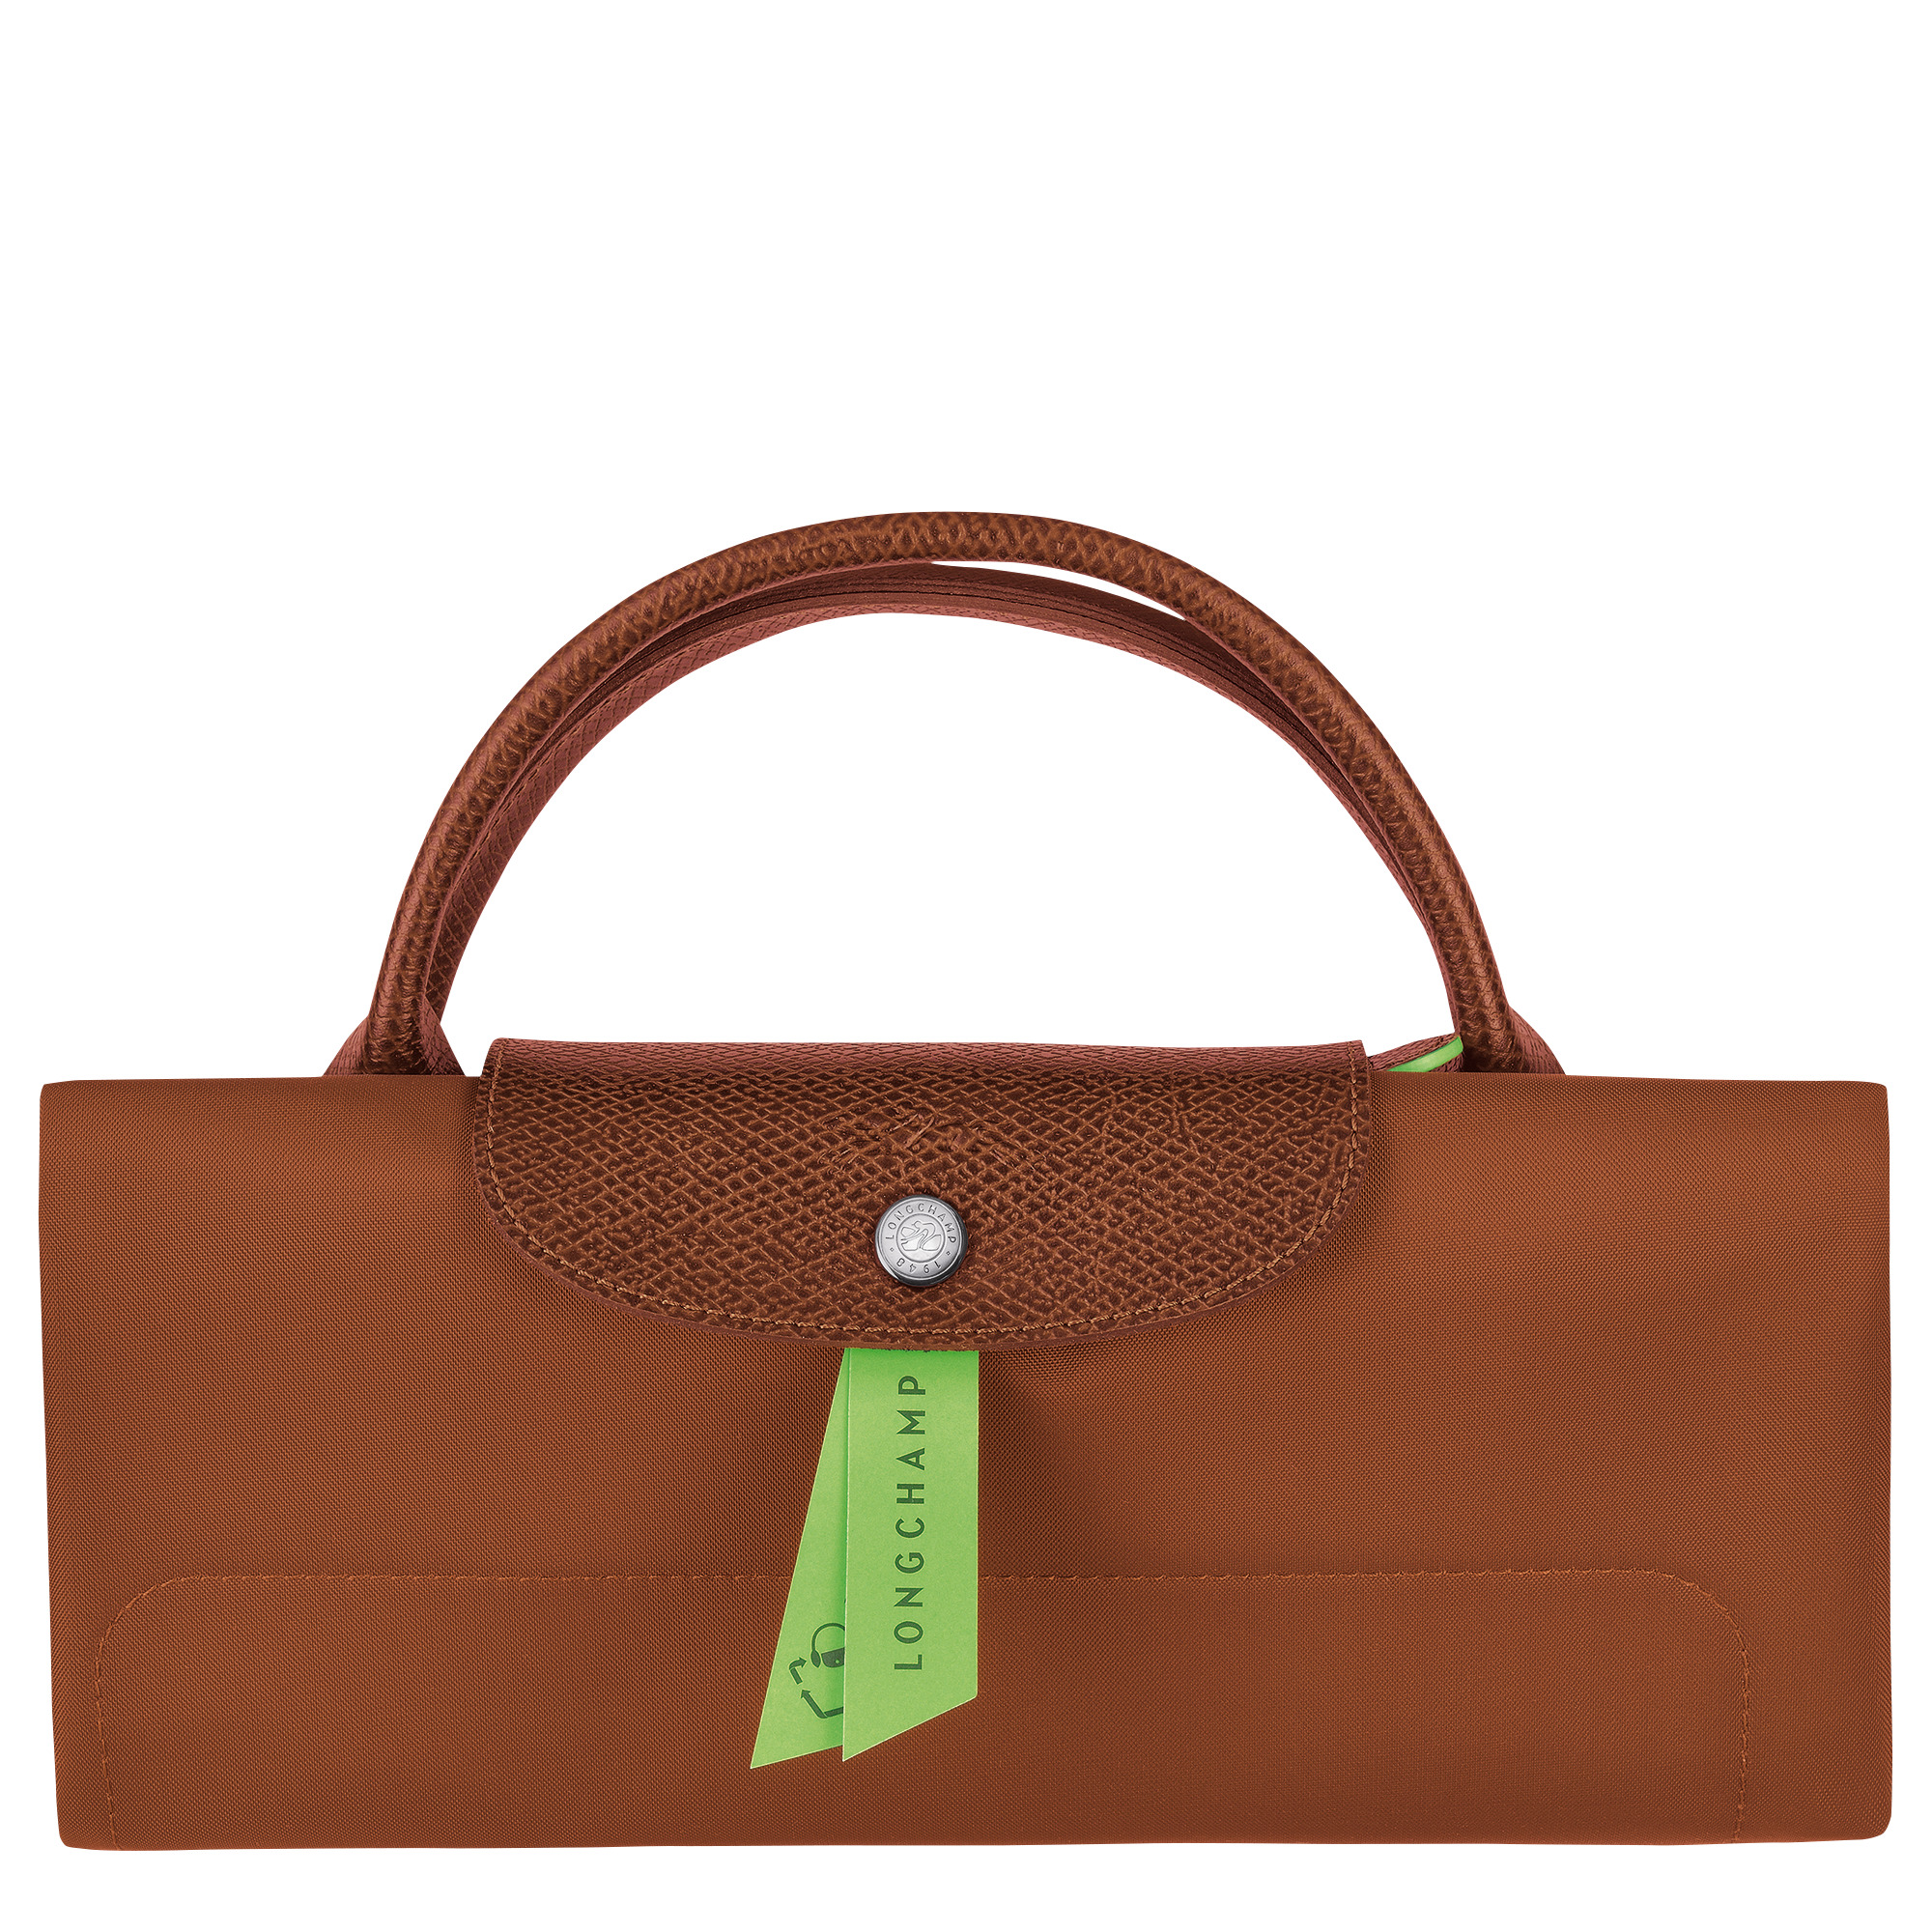 Le Pliage Green M Travel bag Cognac - Recycled canvas - 6